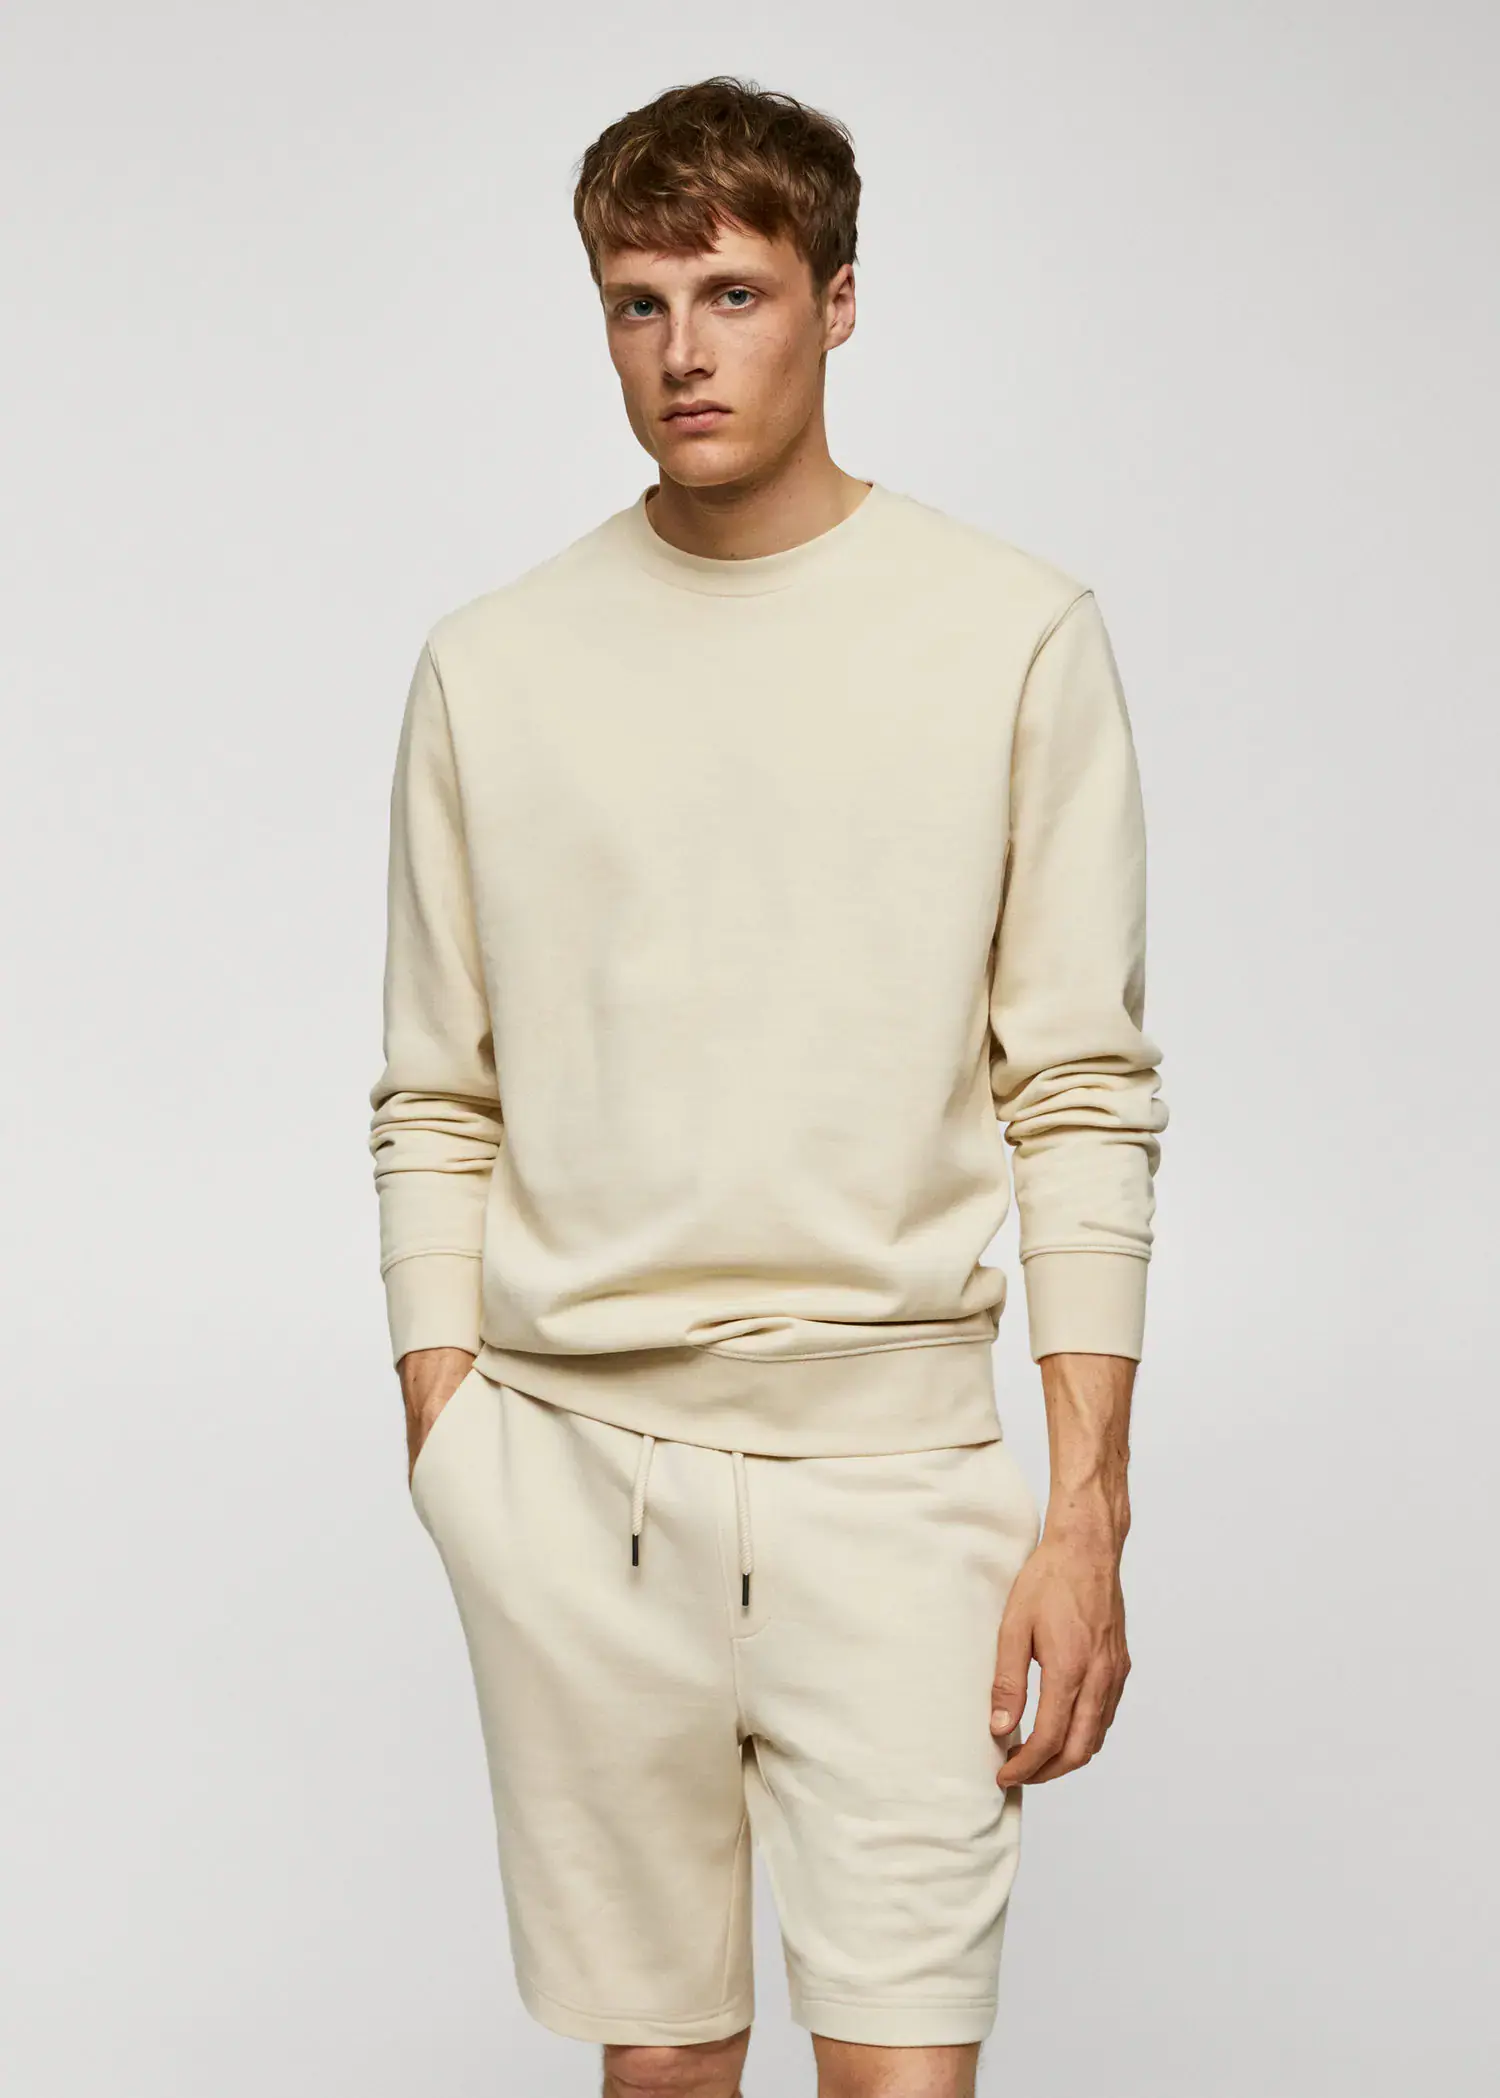 Mango 100% cotton basic sweatshirt . a man in a beige sweatshirt is standing with his hands in his pockets. 